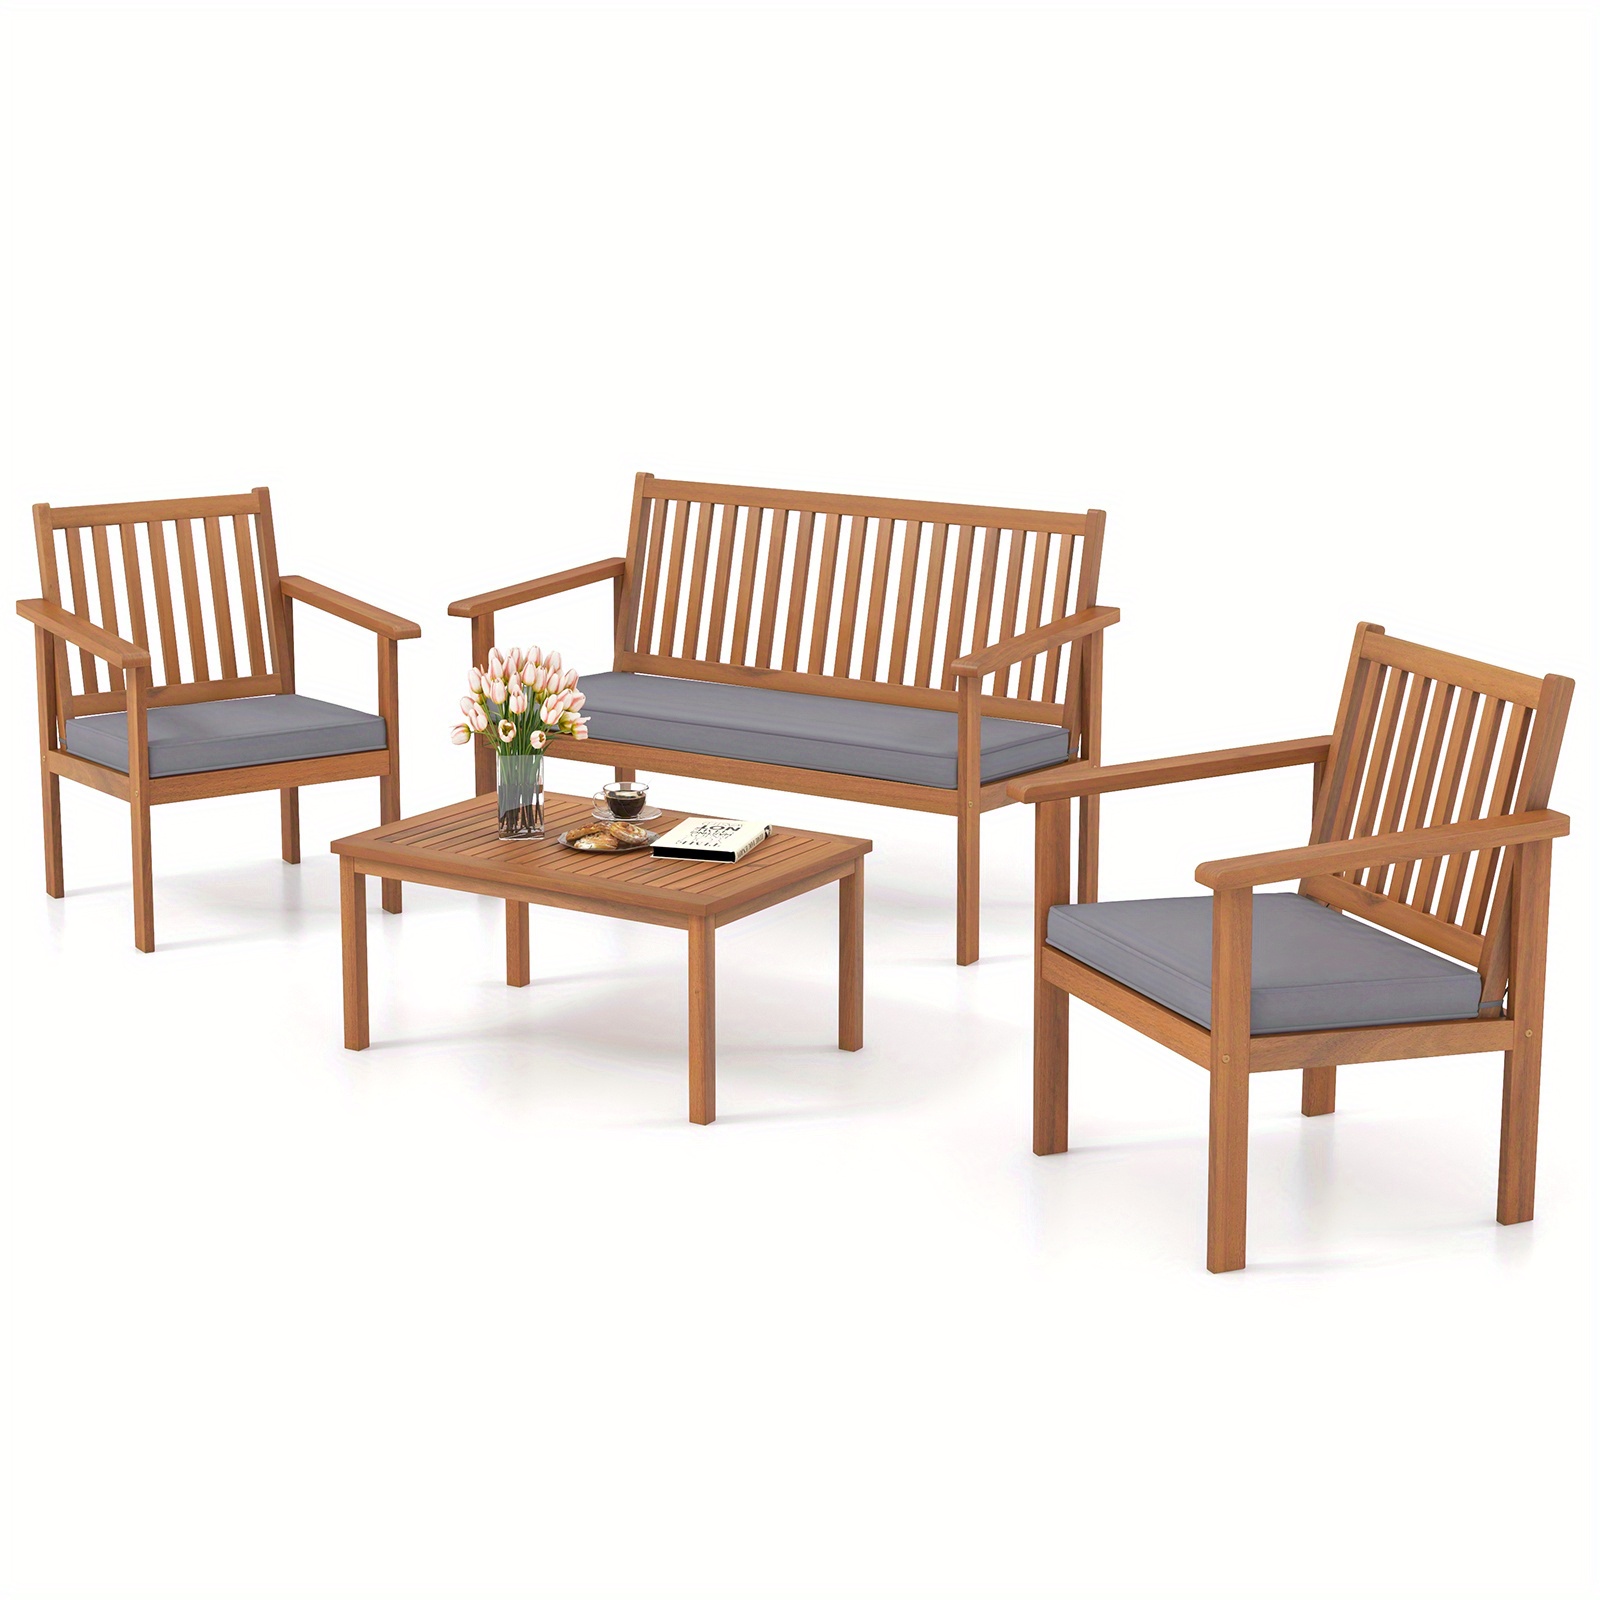 

Lifezeal 4 Piece Patio Wood Furniture Set W/ Loveseat, 2 Chairs & Coffee Table For Porch